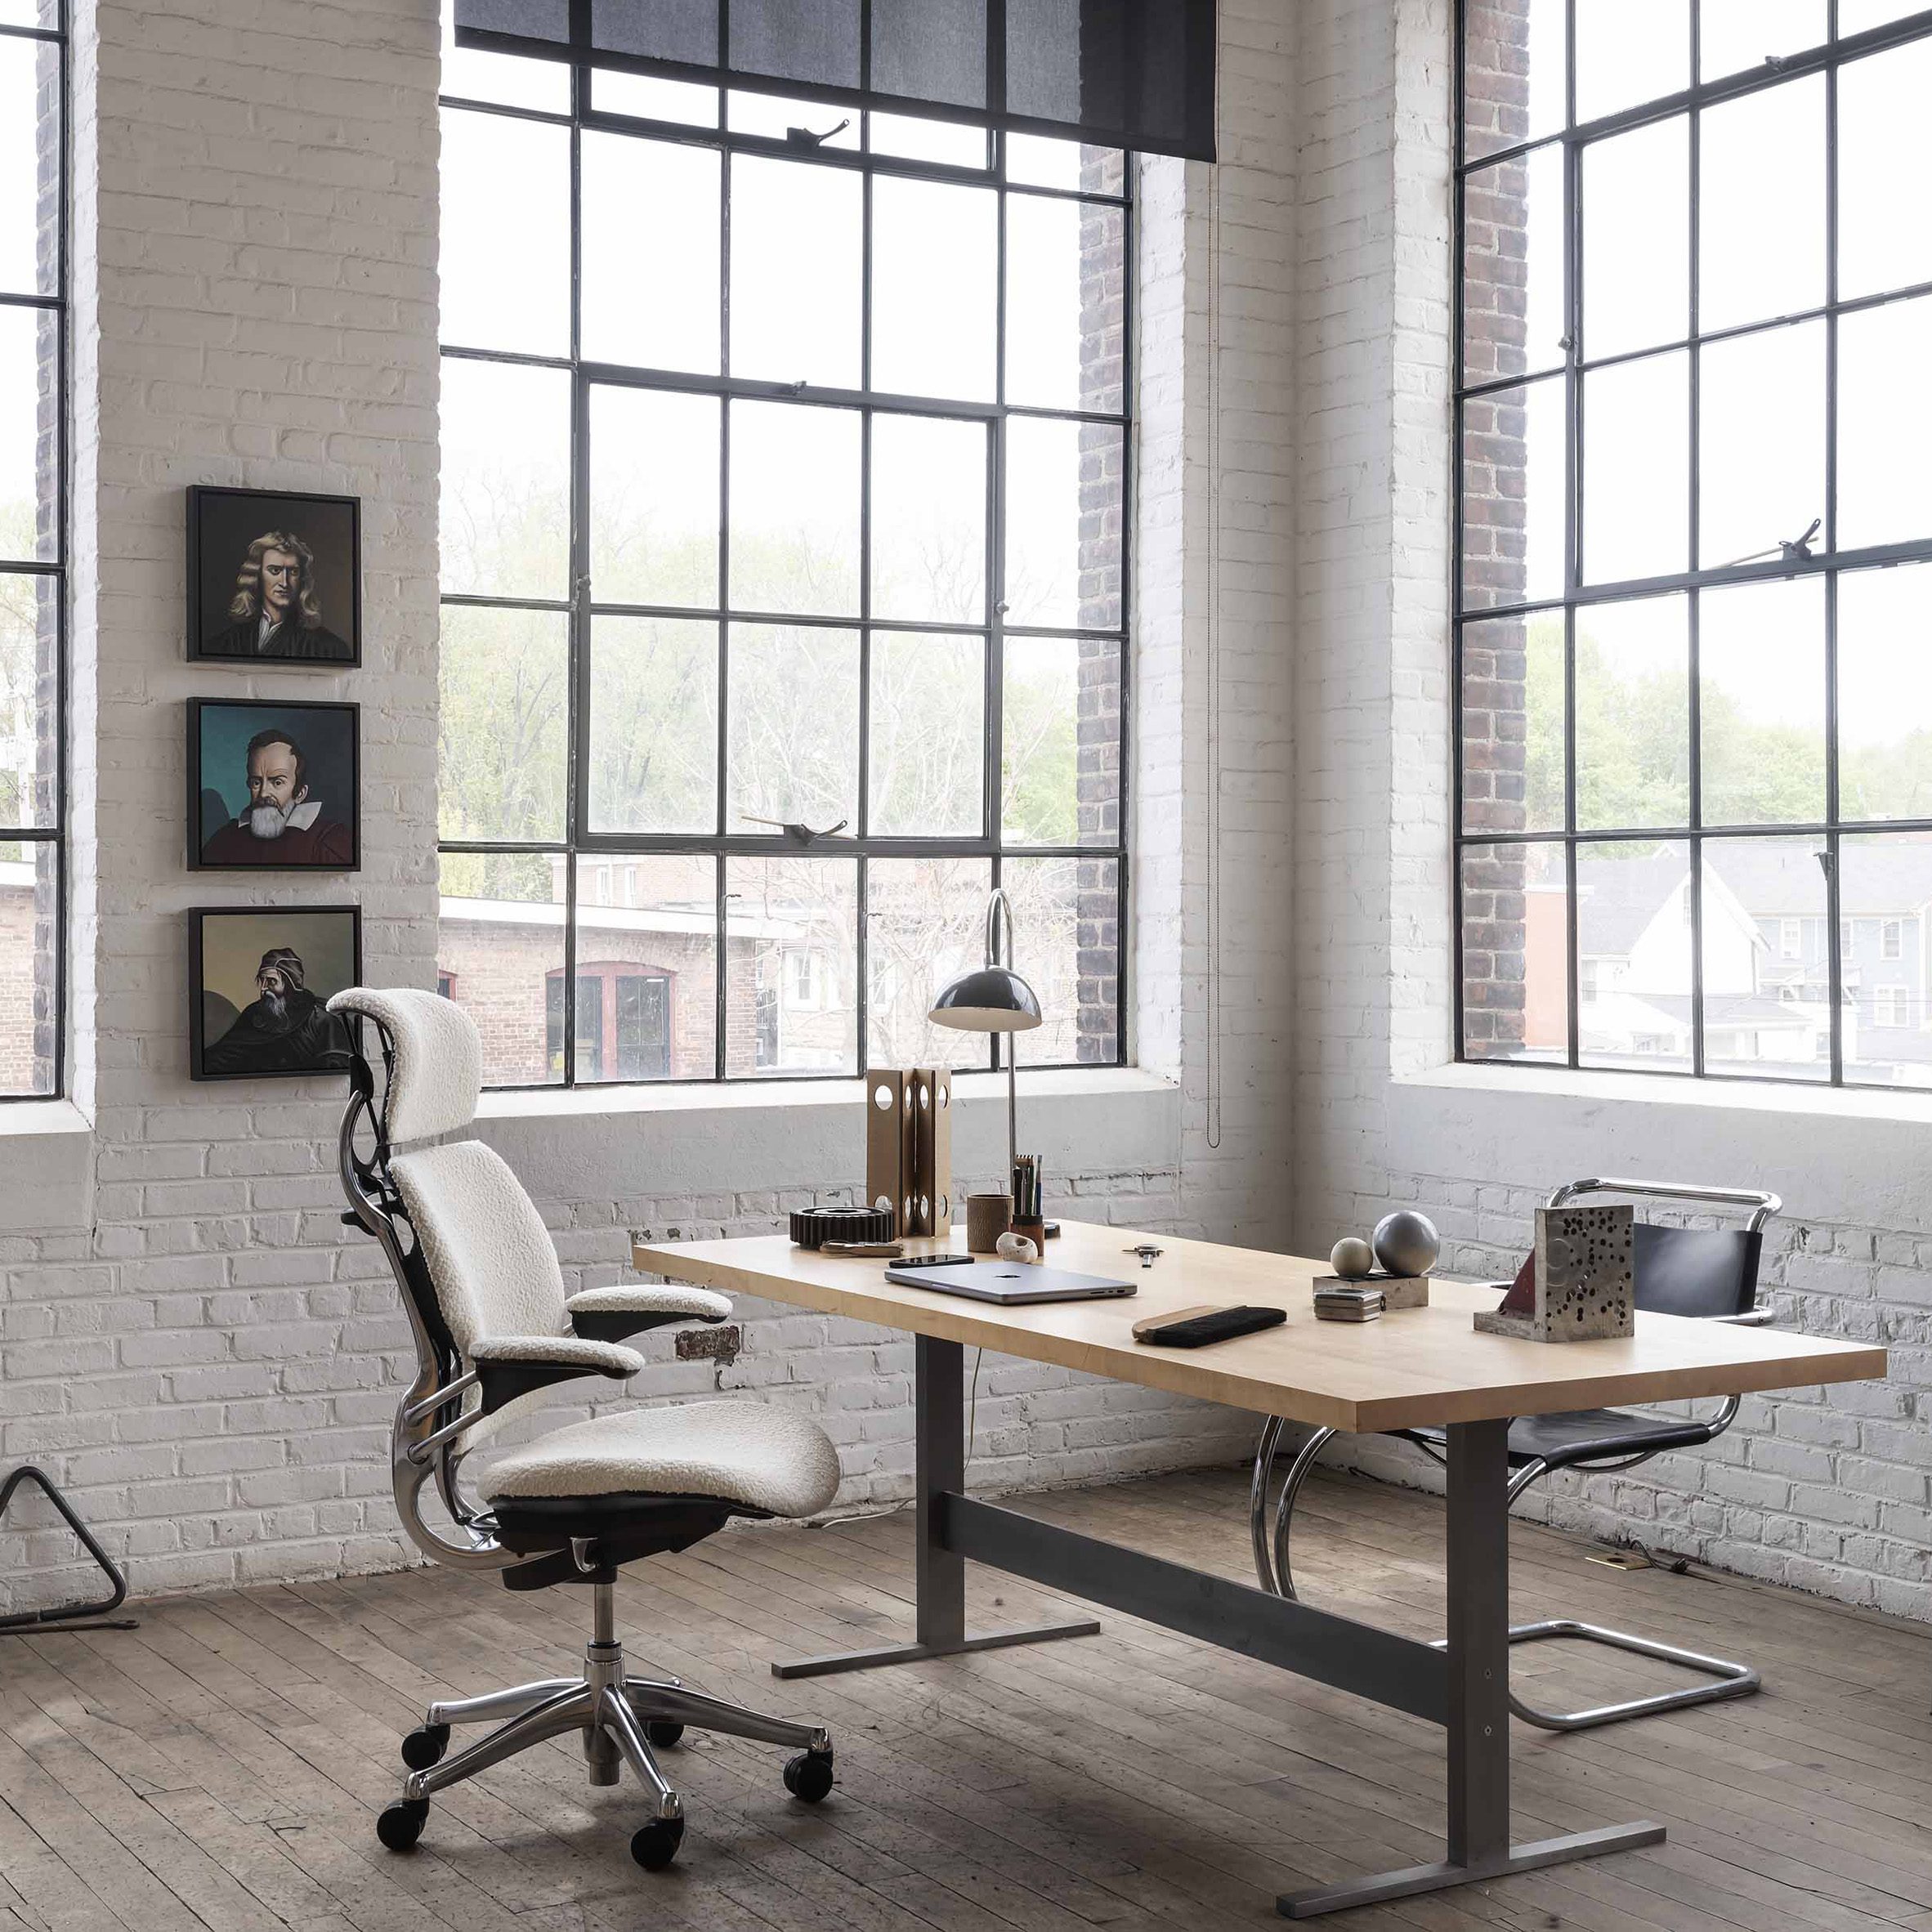 Freedom x Kvadrat collection by Humanscale